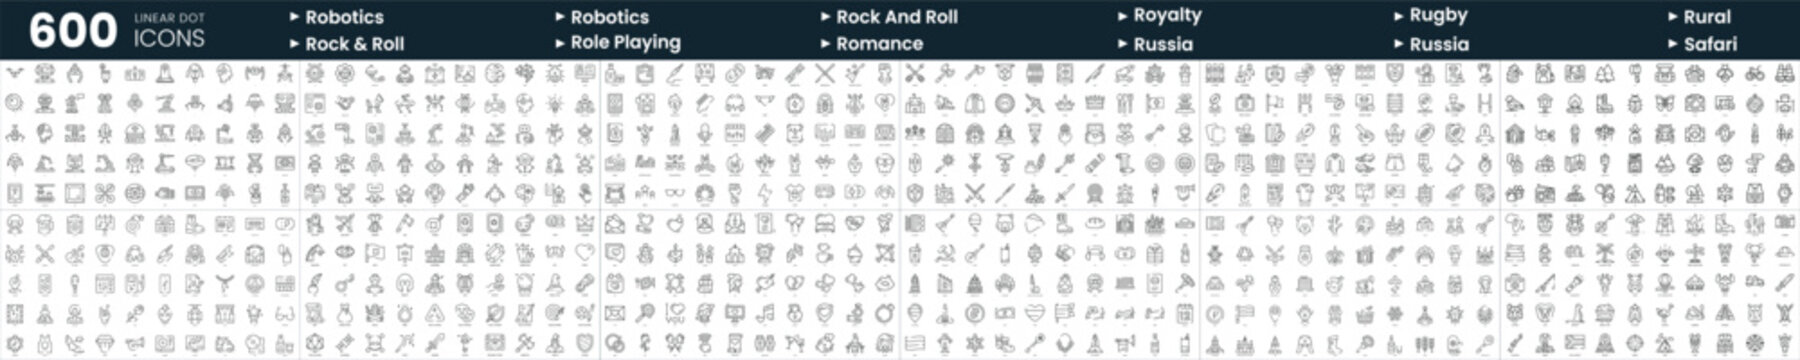 Set of 600 thin line icons. In this bundle include robotics, rock n roll, romance, rugby and more